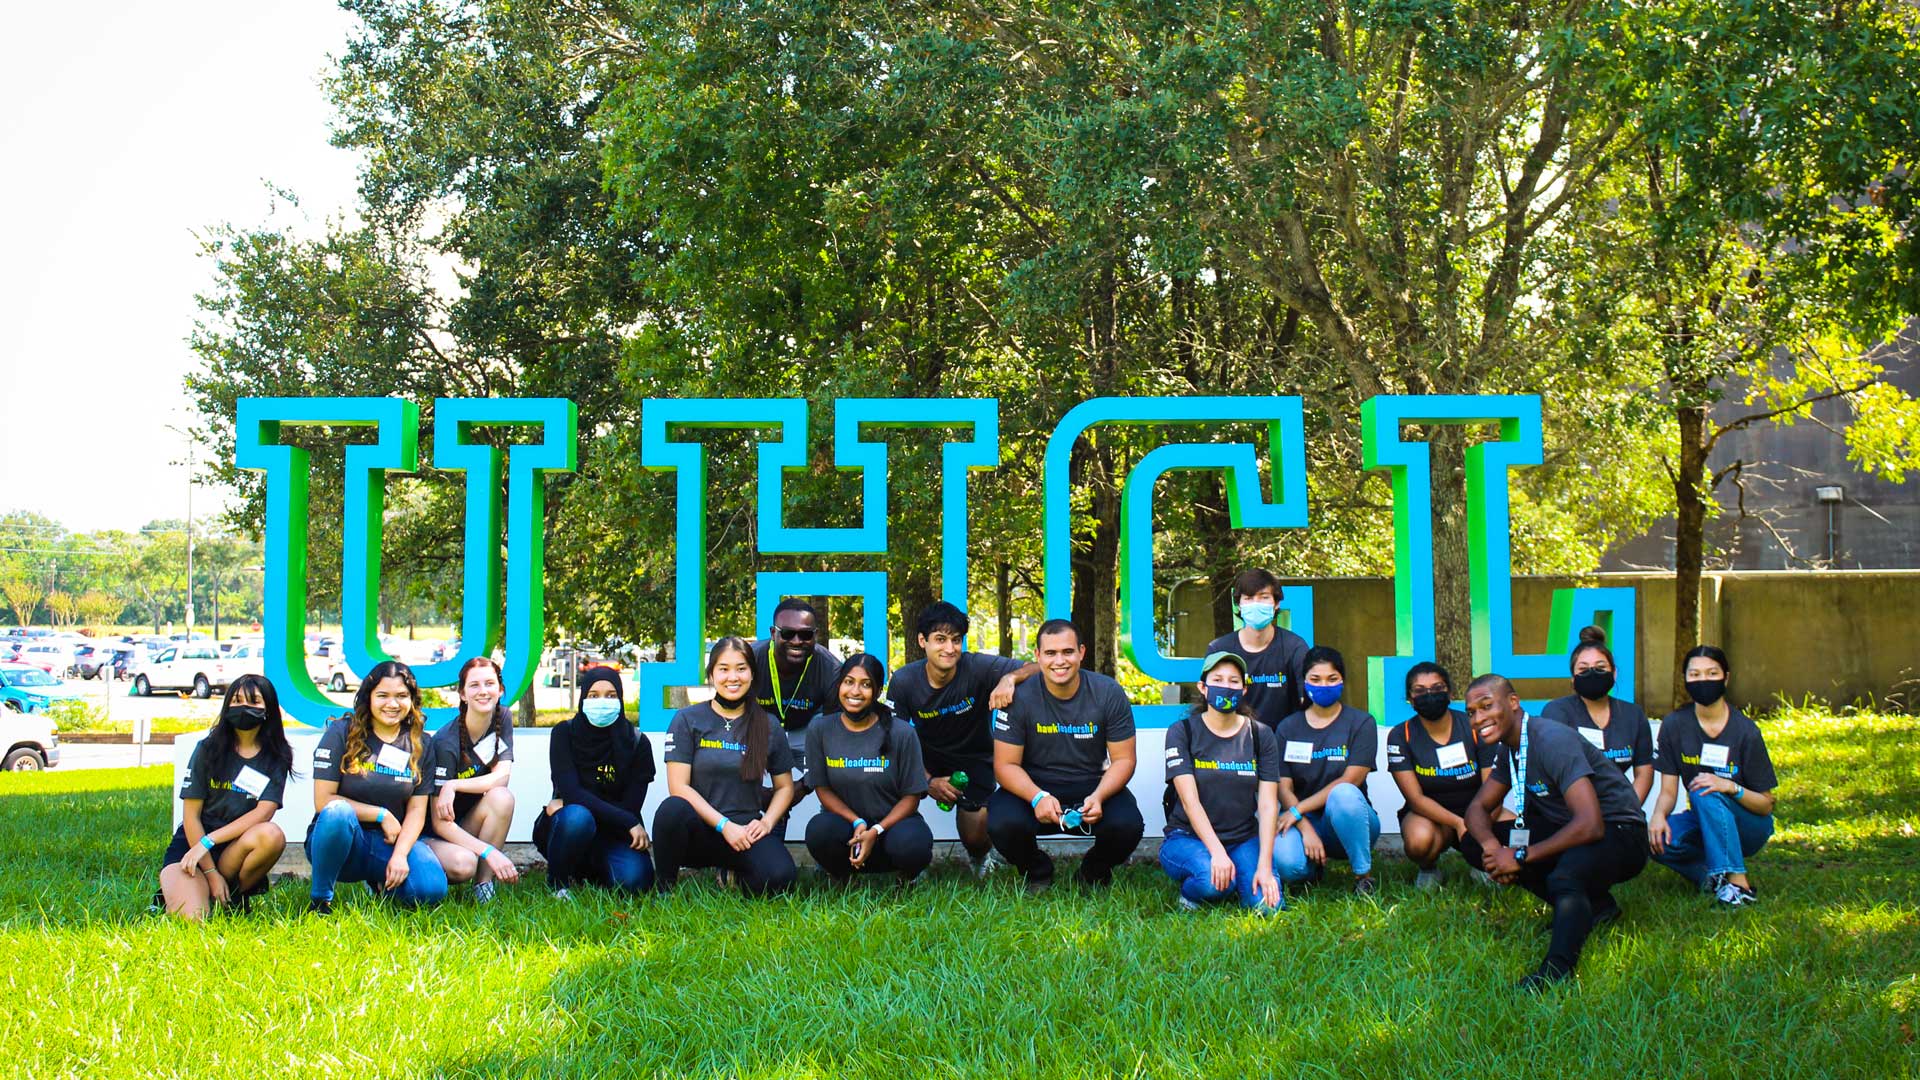 Students gathered in front of the UHCL letters